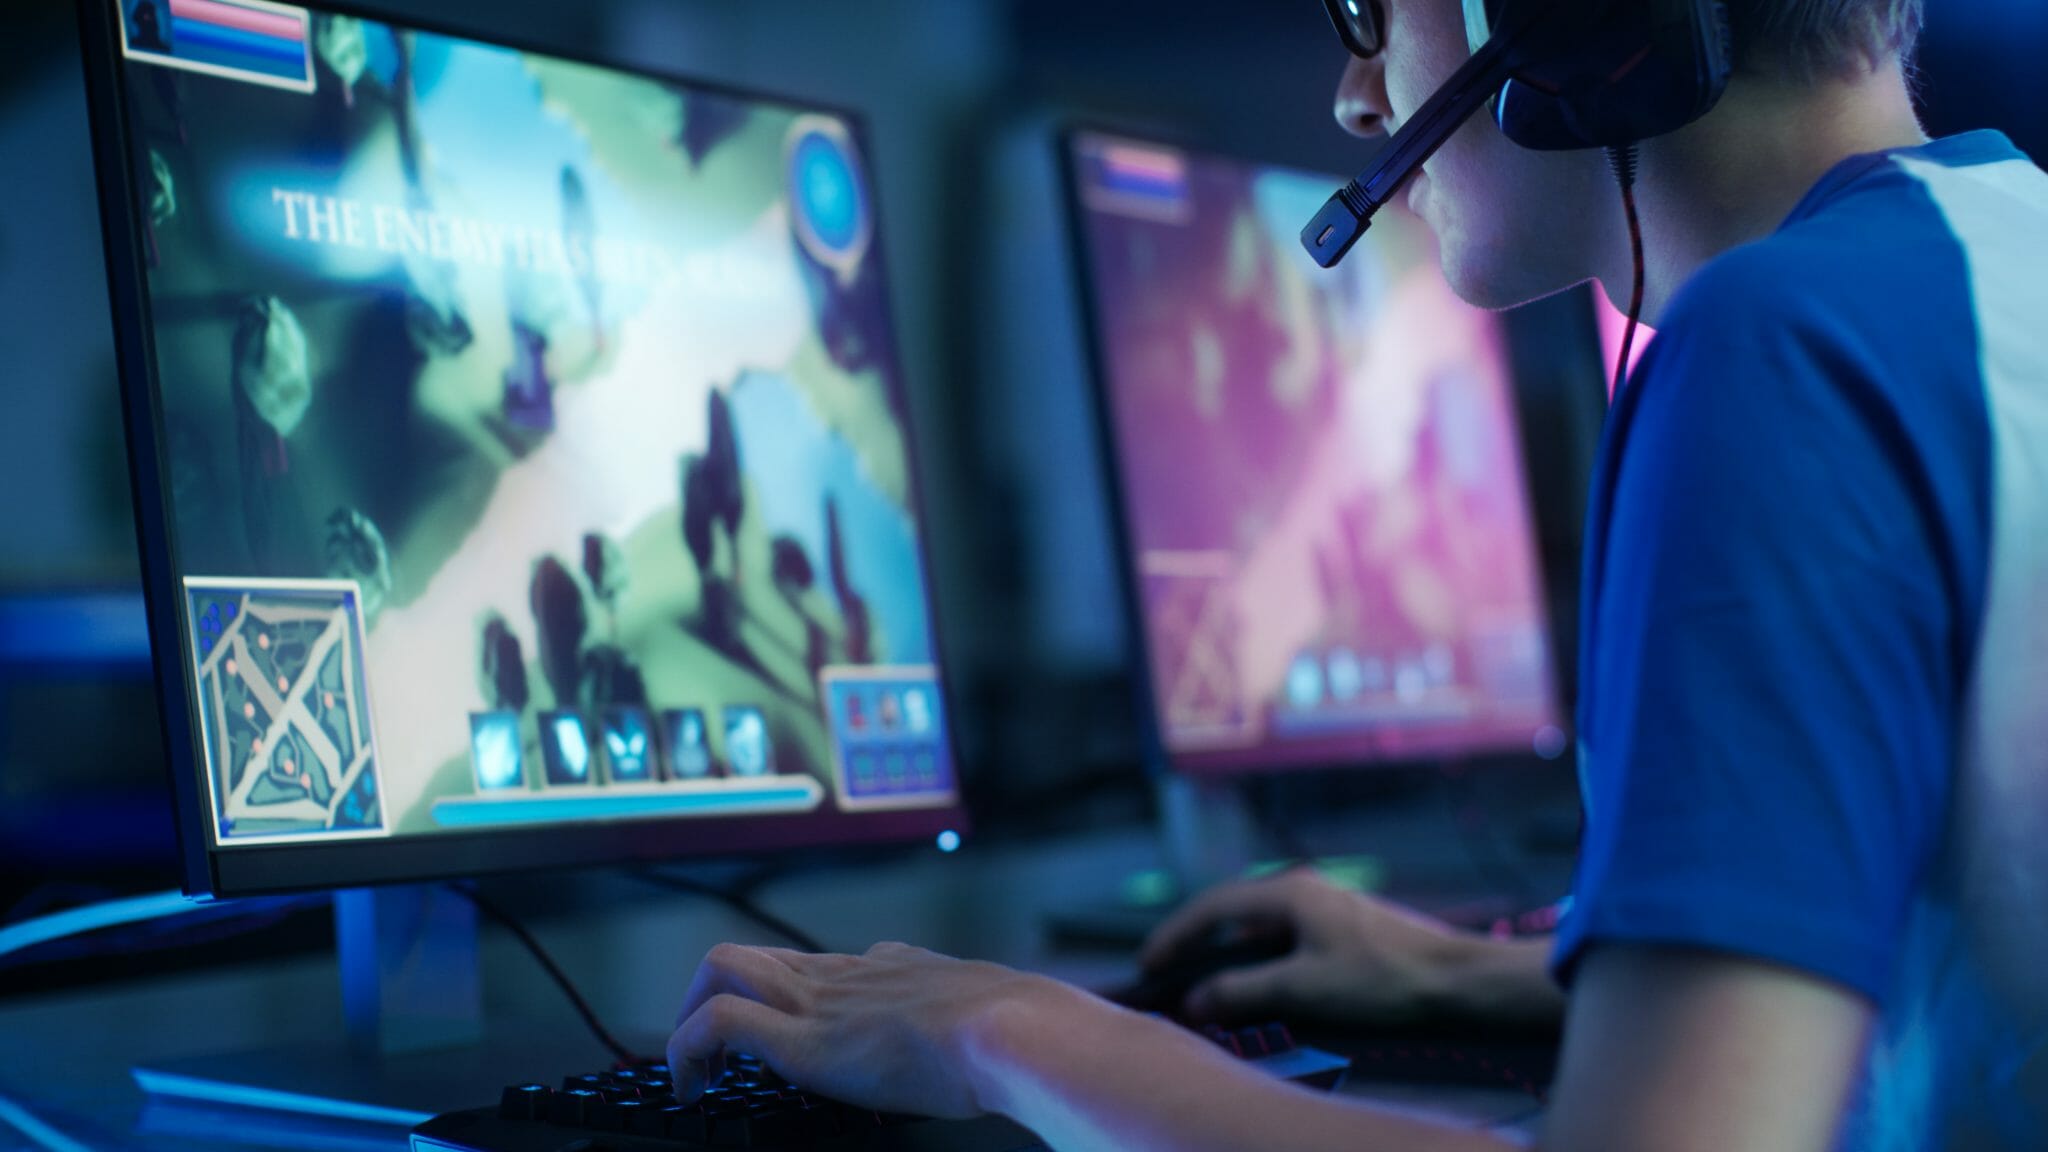 Unidentified person playing a game